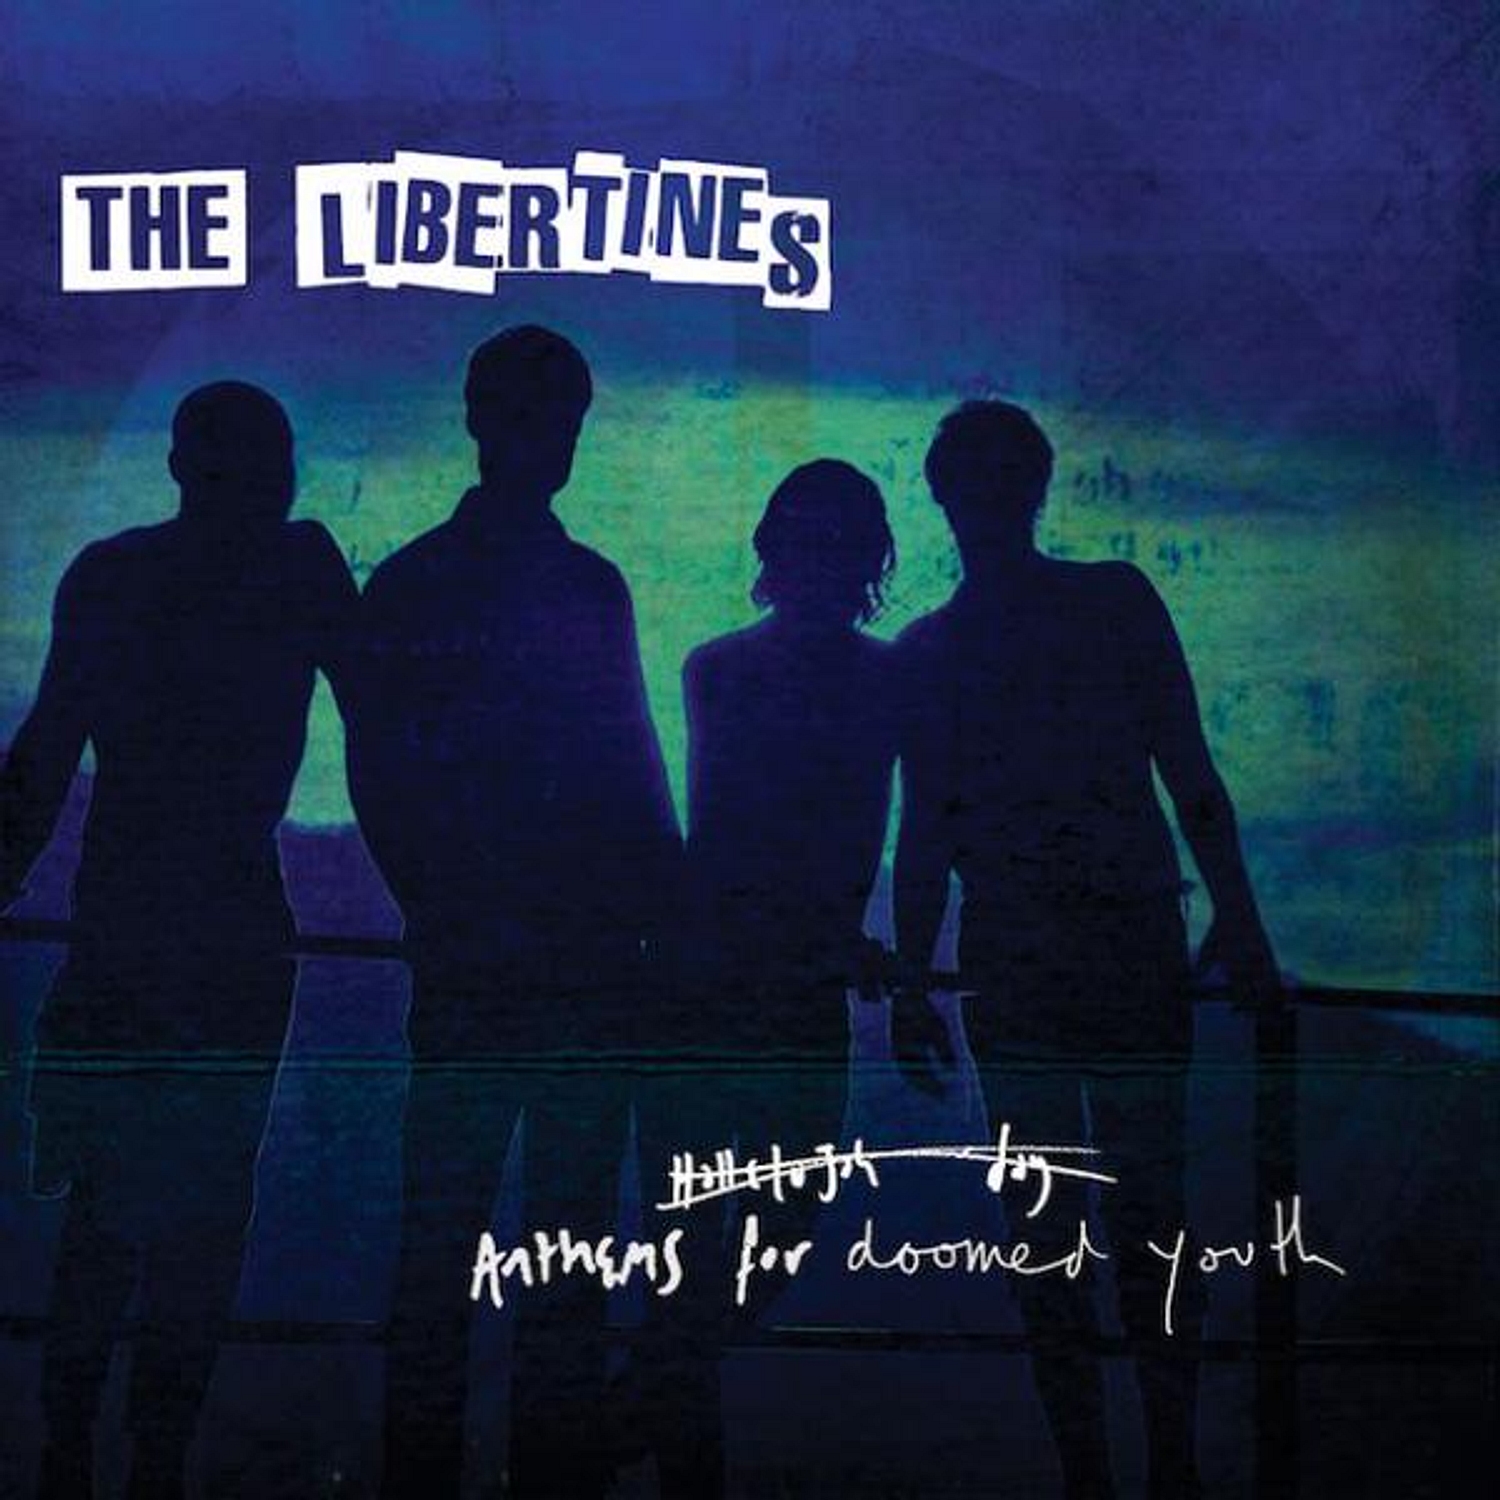 The Libertines announce new album 'Anthems For Doomed Youth'